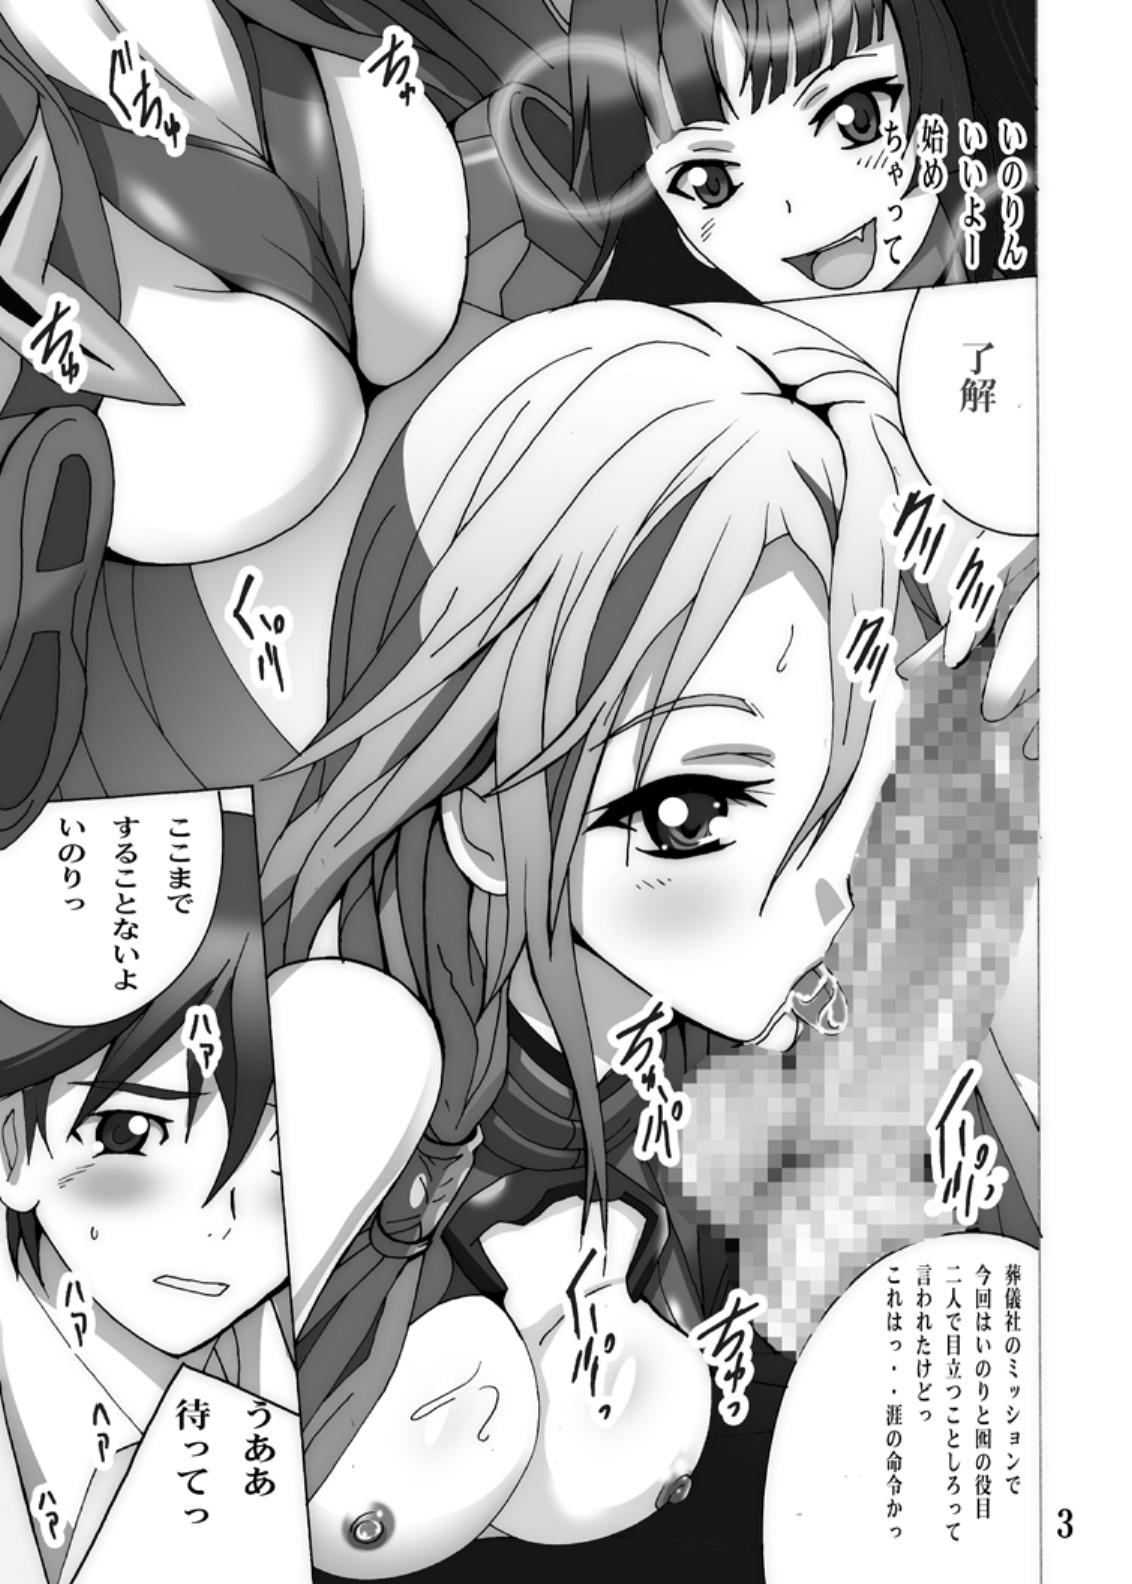 Gym tawamure - Guilty crown Boobies - Page 2